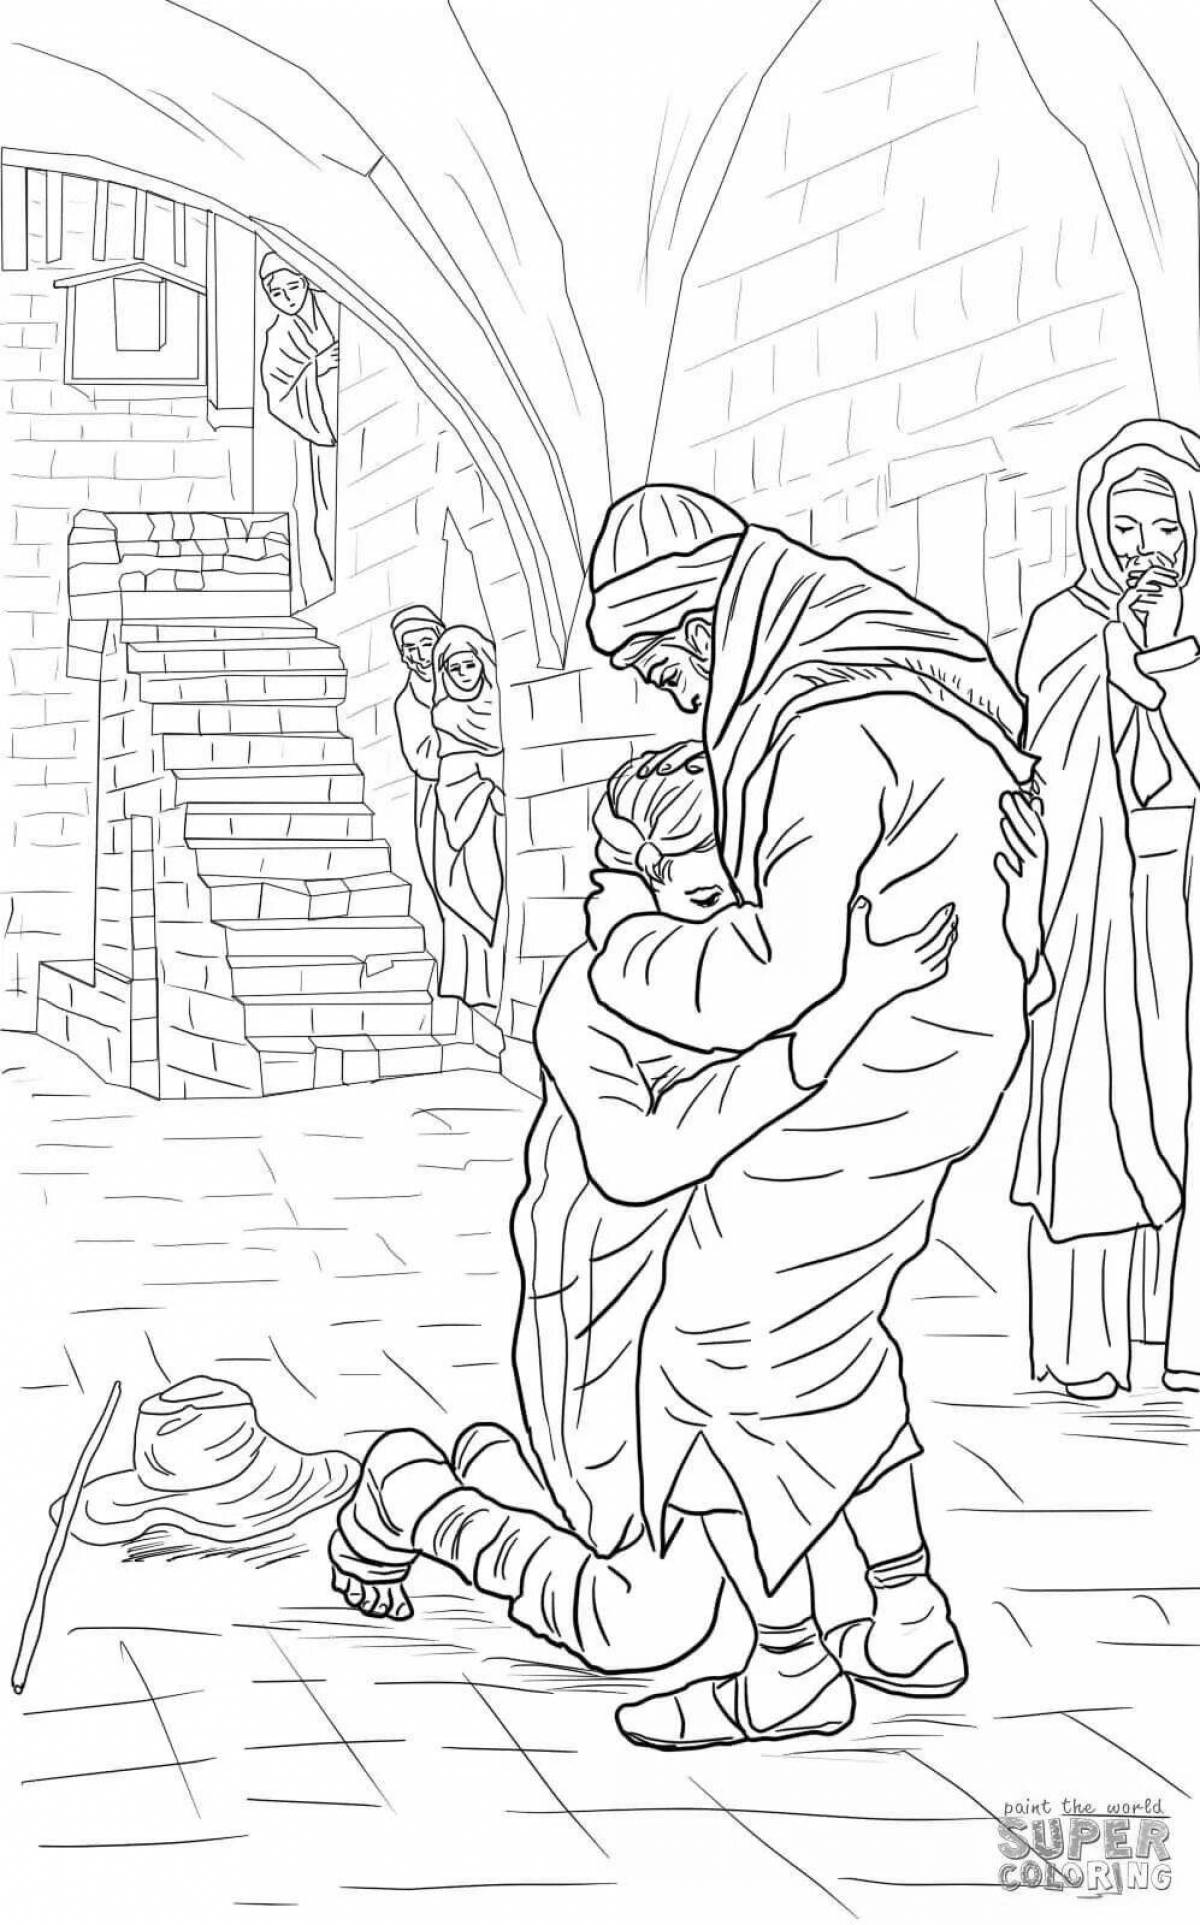 Exciting coloring of the publican and the Pharisee